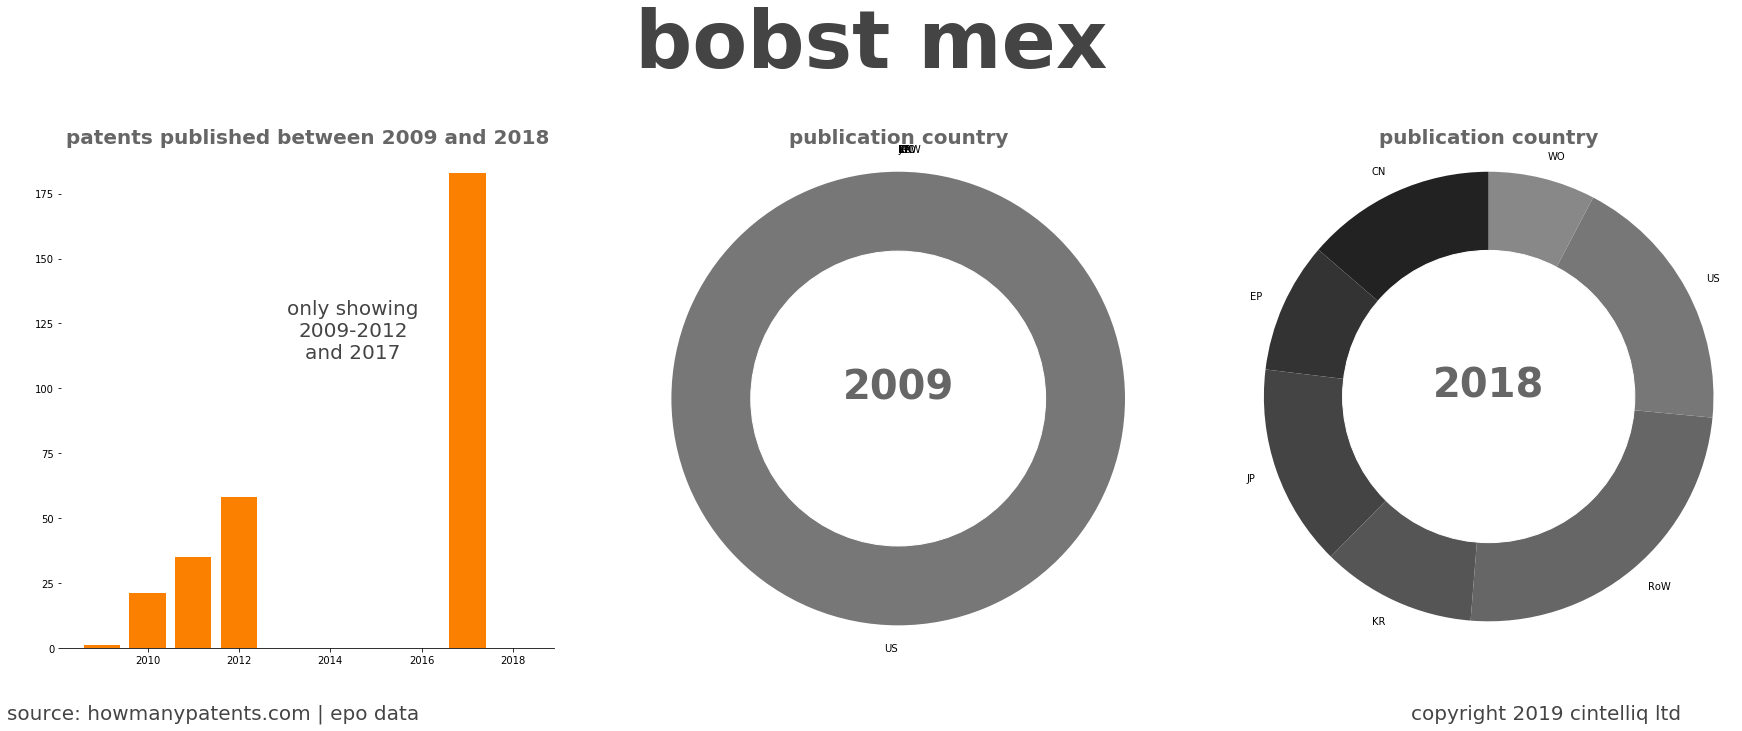 summary of patents for Bobst Mex